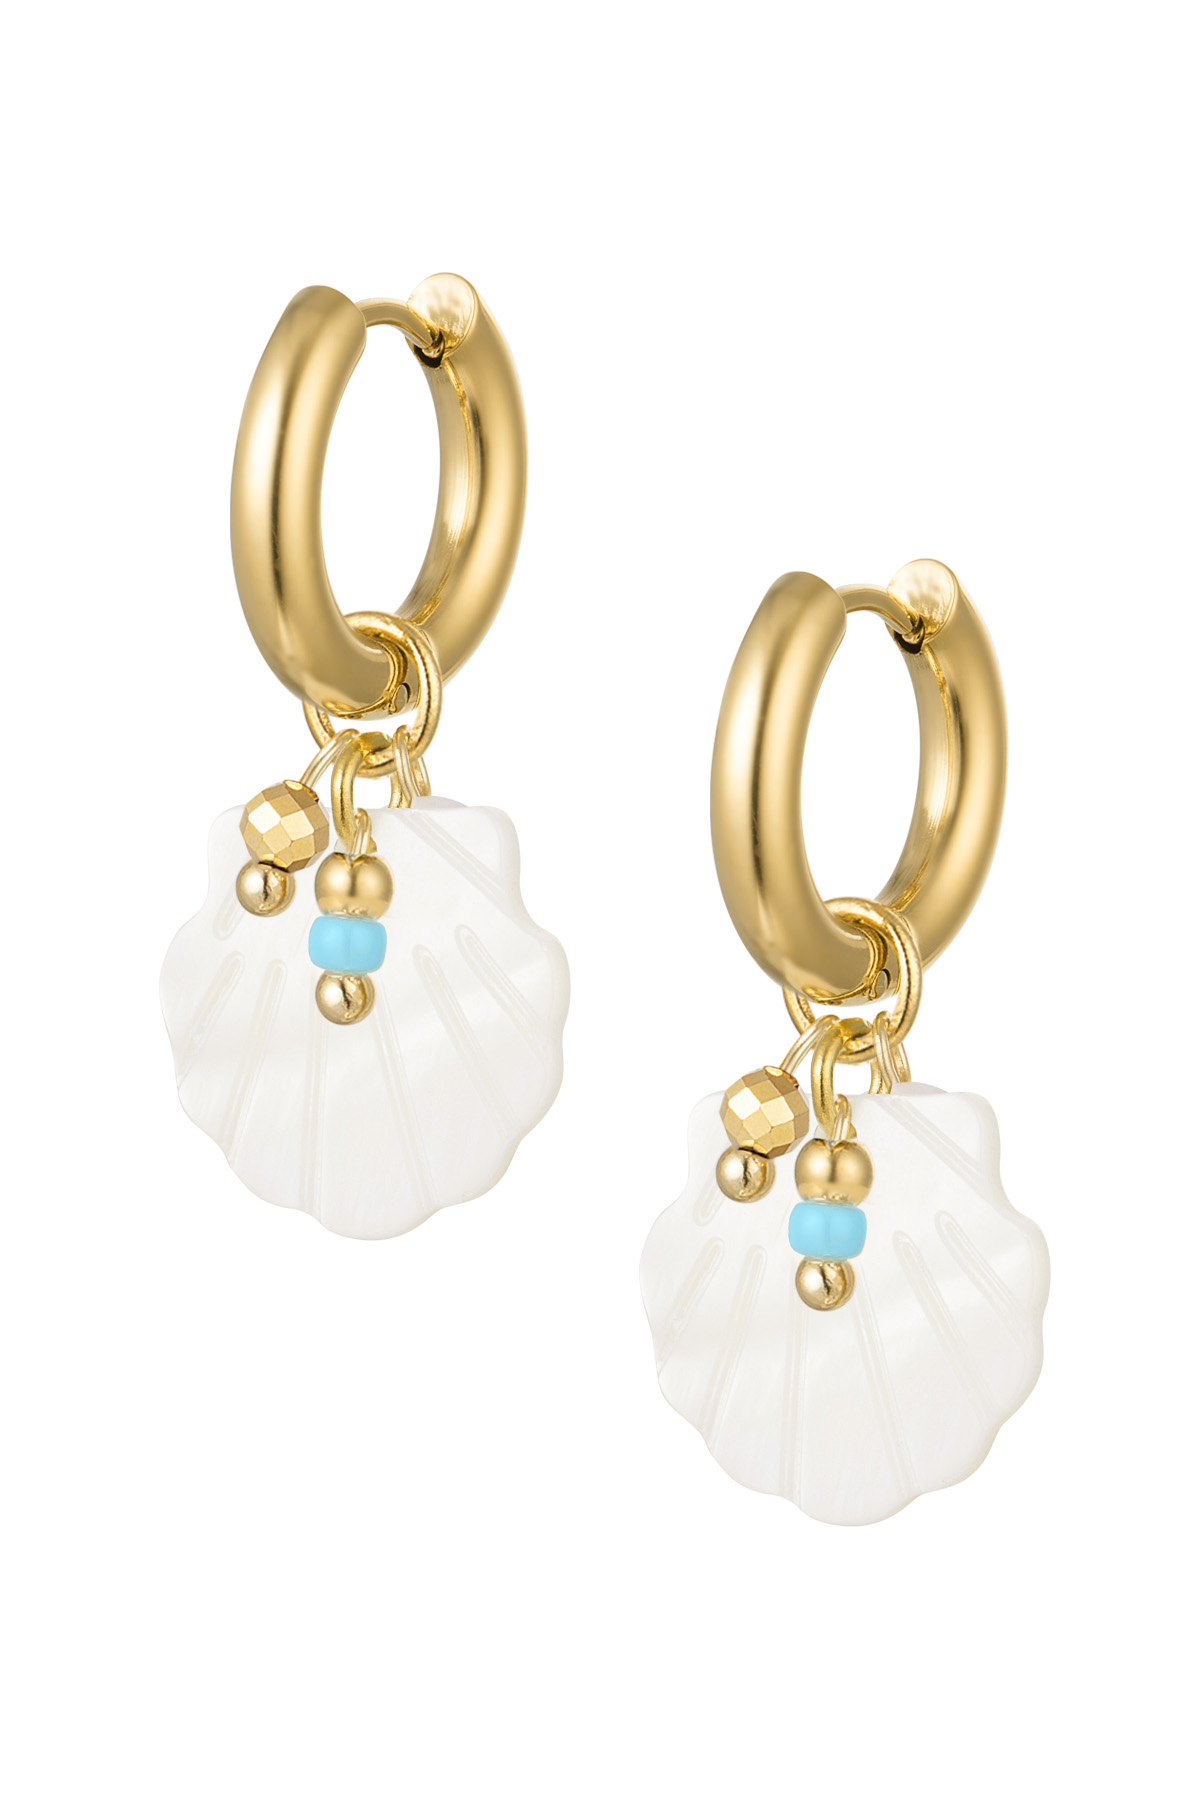 Earrings shell charm and bead - gold h5 